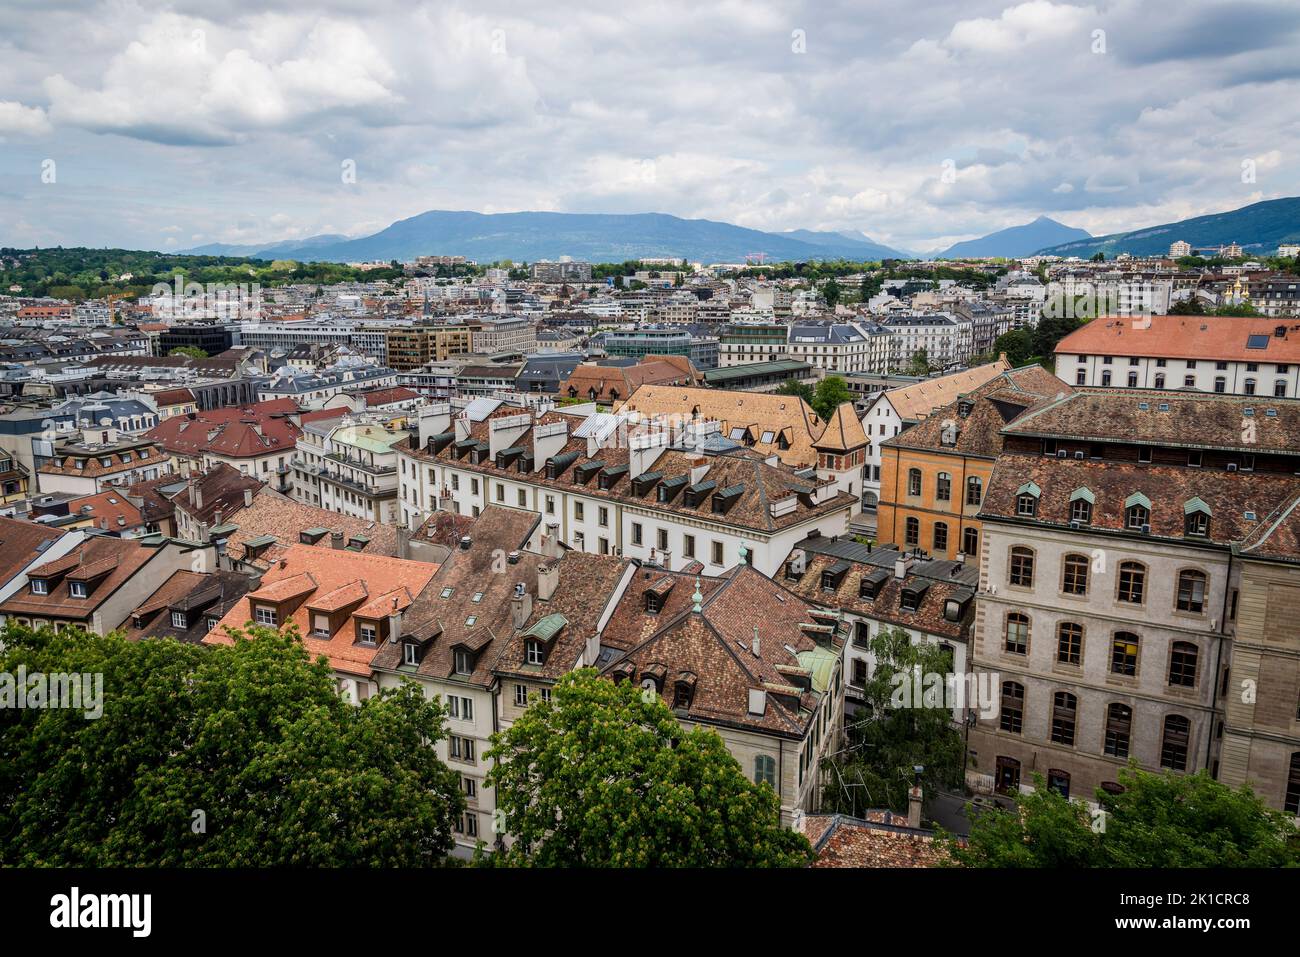 Panoramic view of the city from the South Tower of the St Peter’s Cathedral, Old Town, Geneva, Switzerland Stock Photo